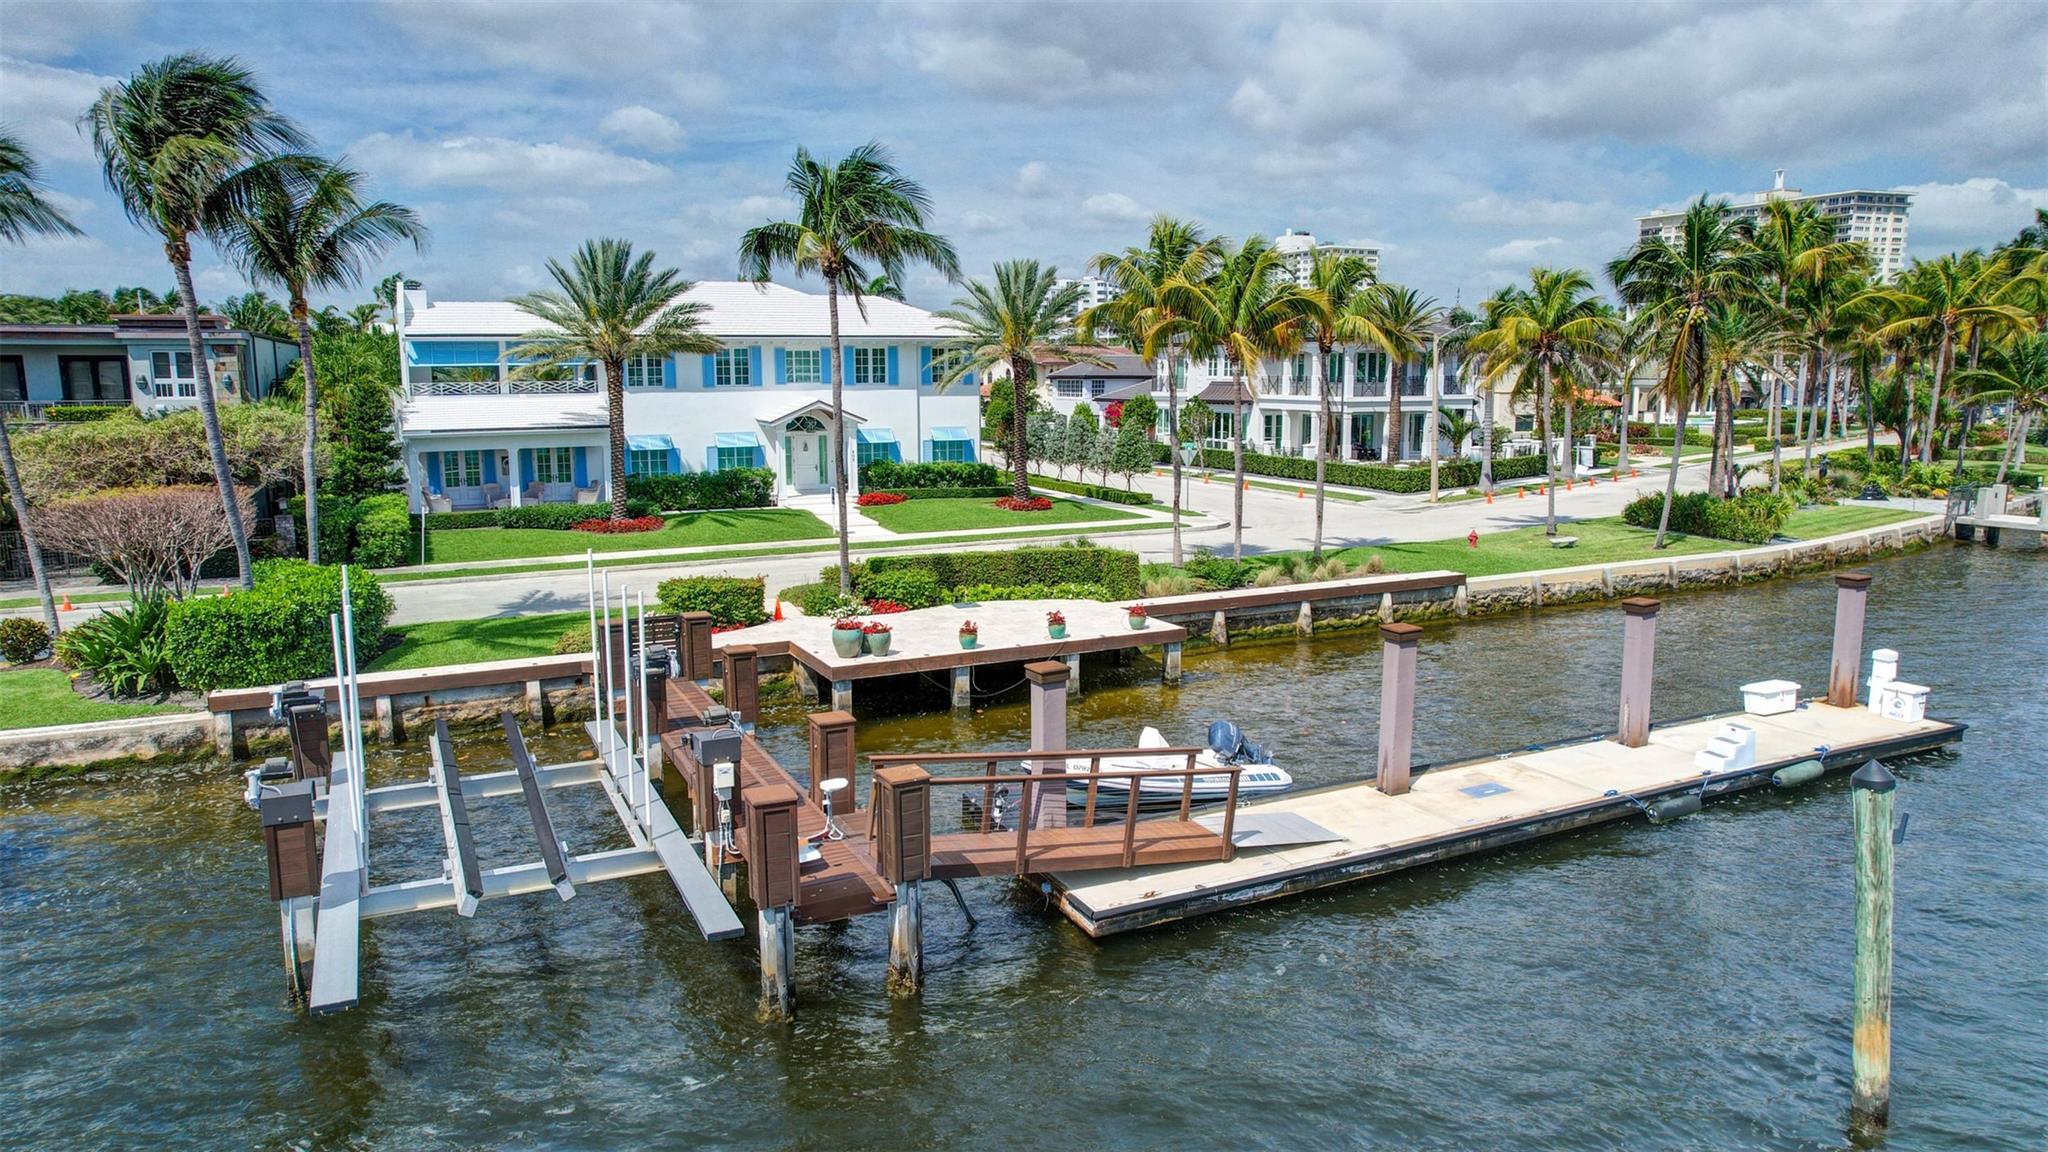 Newly built custom intracoastal Estate offers a daily boat parade with wide open intracoastal views from many rooms. Superbly located in highly desirable, security patrolled Idlewyld, close to beaches & Las Olas. Barely occupied, shows impeccably & as-new! Sophisticated island inspiration, high quality construction, millwork & natural finishes, hardwood floors & unique marbles. Lutron technology. Ultimate Chef's kitchen, professional grade appliances. 1st level: media, living & dining areas, 6th bed suite/home office option. Upstairs 4 bedrooms + ultra-luxury Primary Suite, dual closets/spa baths. The large covered outdoor terrace off primary suite captures constant views & breezes. Private resort style pool/spa, cabana. 100ft frontage/30,000lb lift/floating multi boat dock in No Wake Zone - Additional lot is NOT INCLUDED.
- All outdoor patios, walk ways and pool surround are Shell Reef brushed limestone. Handcrafted glass mosaic tiles in the pool and spa that has a wall fountain feature.
- Saltwater pool with stepping stone and beach ledge water features.  Pool side gas fire bowl feature, retractable electronic awning and separate spa.  Dedicated cabana bathroom.
- Kitchen countertops are Taj Mahal honed & leathered quartzite.  Backsplashes Ann Saks.  Professional grade appliances includes La Cornue gas range, Sub-zero fridge and freezer plus two dishwashers.  Large center island perfect for casual dining.
- Downstairs en-suite potential bedroom, office or media area.
- Large two car garage has custom cabinetry and storage.
- 2nd level Primary Suite is the perfect retreat.  Private access to the large covered terrace which is perfect for capturing the intracoastal views in privacy.  Enjoy the vaulted ceilings and island ambiance!  There is also a private exterior staircase offering access to the pool.
- Primary Suite includes two separate spa style bathrooms finished with statuario marble, custom cabinetry and tiles. Two large dressing rooms and morning bar.
- Two of the secondary bedroom suites have access to a private stairway down to the pool and lawned additional lot.
- The intracoastal waterway bedroom suite has an incredible spa style bath with soaking tub and separate shower.
- The laundry and utility room is on the second level.
- Air conditioners include: #1/5 ton, #2/3 ton, #3/2 ton, #4/3 ton and 2 mini splits in the family room plus 1 mini split in the garage.
- Idlewyld Security has two elements, the Idlewyld Improvement Association maintains the gate and center island.  There is also private security patrol overnight.
- Low tide depth at the dock is approximately 7 ft and there are 5 ft boater's set backs & 30,000 lb boat left.  Multi yacht dockage potential to put a larger yacht on the outside dock, tender on the lift and additional smaller boat or water toys on the inside of the floating dock.  All privately gated.
_ New construction by top builder, Jim La Vallee Construction, Fort Lauderdale.  The custom detailing and quality of this residence must be seen to be appreciated.